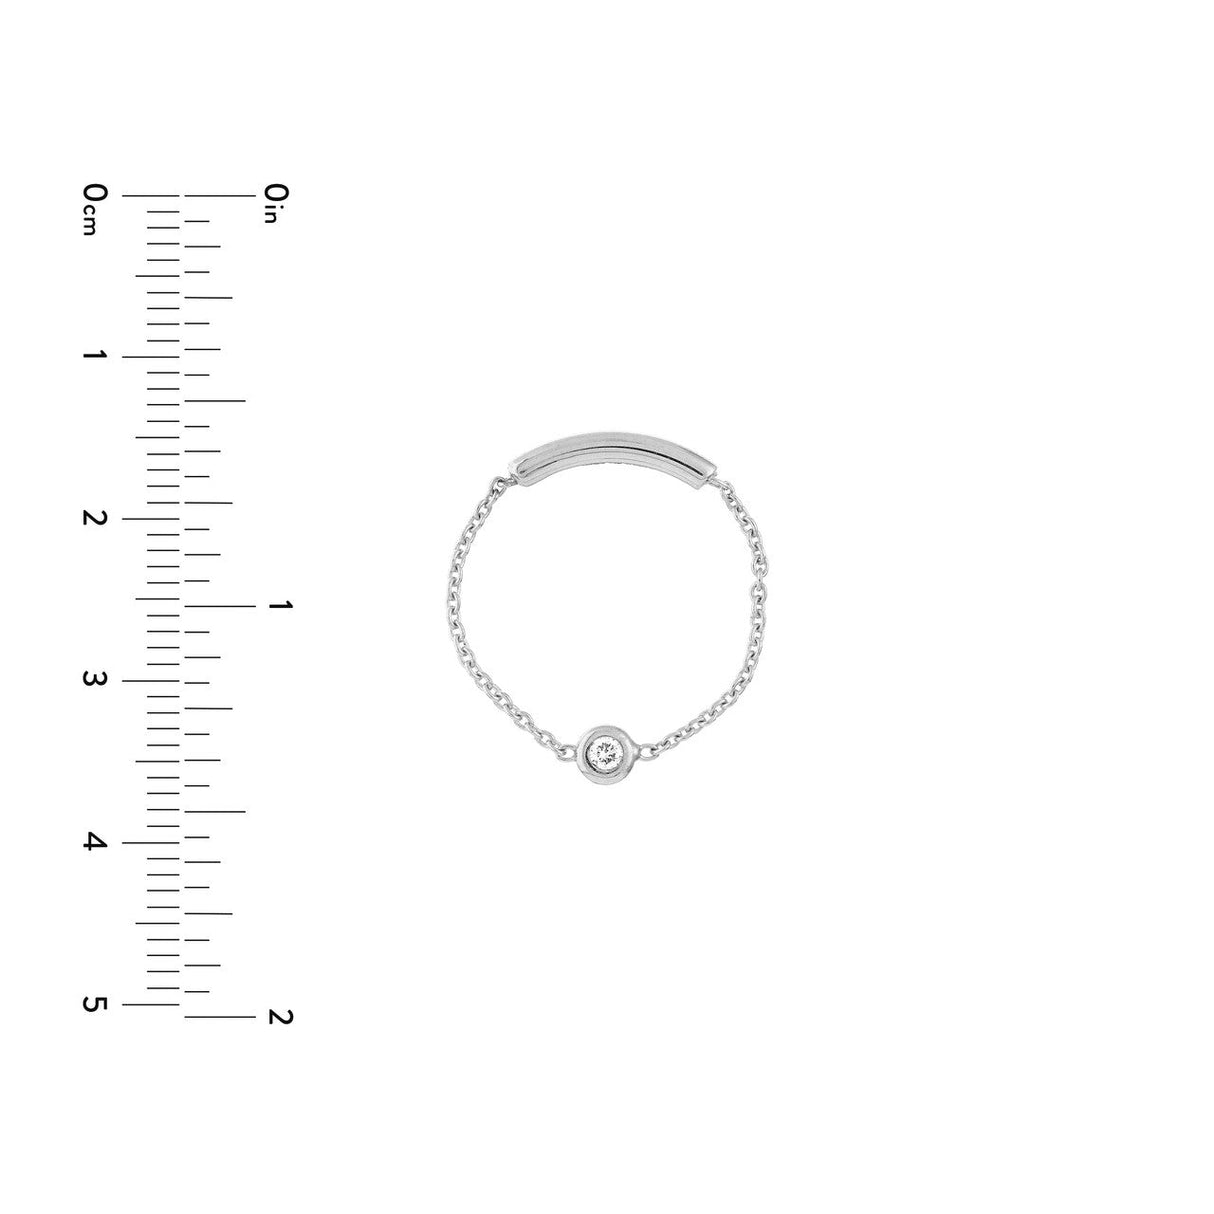  Diamond Bezel Chain Ring with a Sizing Bar. This eye-catching ring is crafted from high-quality materials, boasting a sleek and modern design that is perfect for everyday wear. The centerpiece of the ring is a beautiful 3pt diamond, securely held in place by a chic bezel setting. The chain link band adds a unique touch of style and sophistication, creating a truly one-of-a-kind piece. The Sizing Bar ensures a perfect fit, making this ring comfortable and easy to wear. 